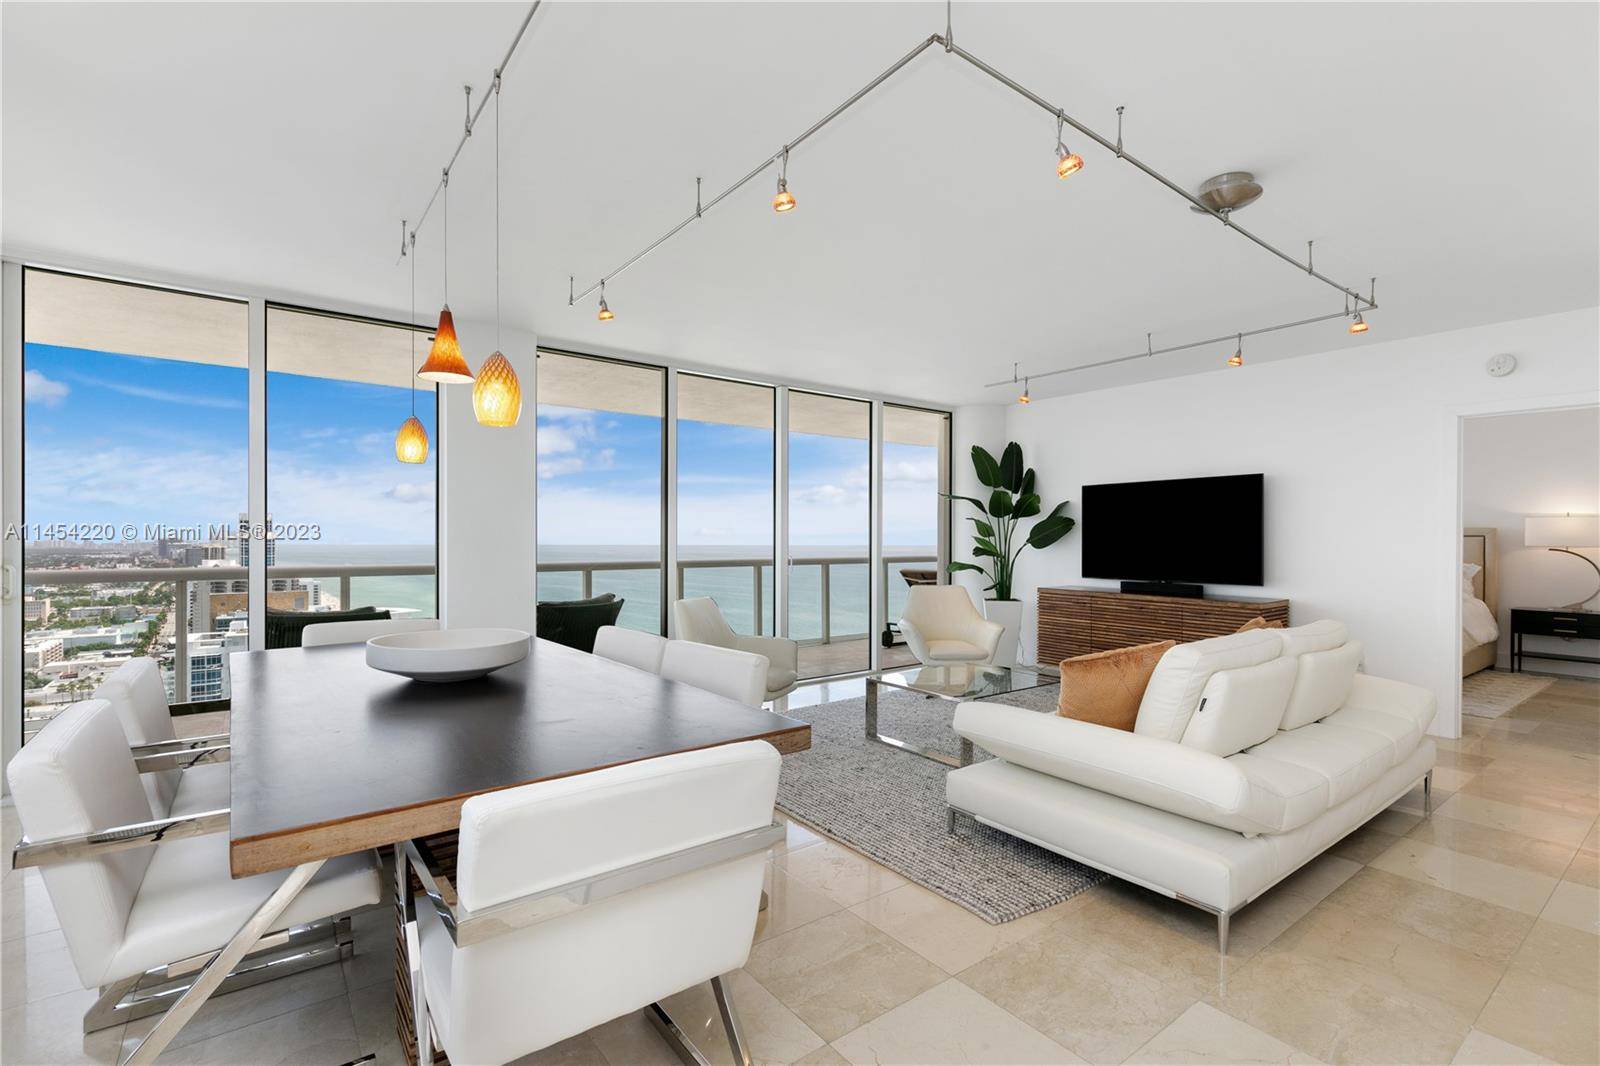 This two bedroom, two bathroom apartment boasts a breathtaking 270 degree view of both the ocean and the city.